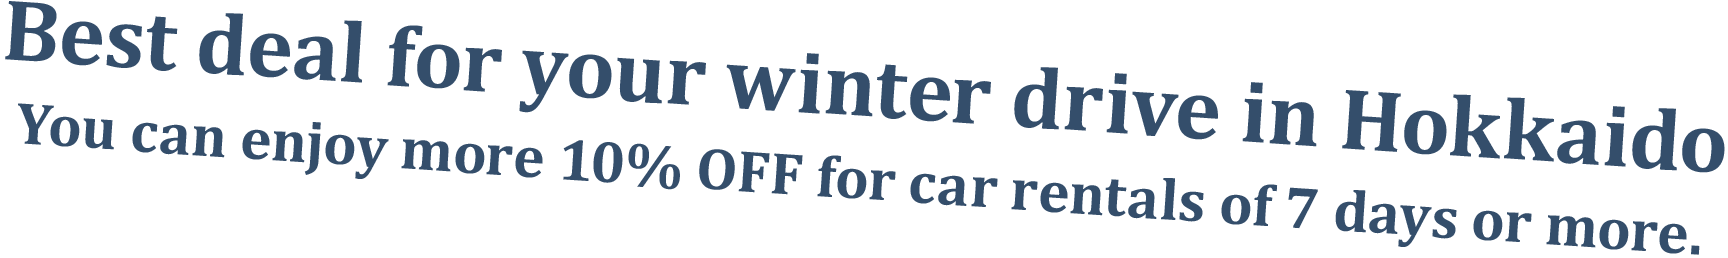 Best deal for your winter drive in Hokkaido You can enjoy more 10% OFF forcar rentals of 7days or more.